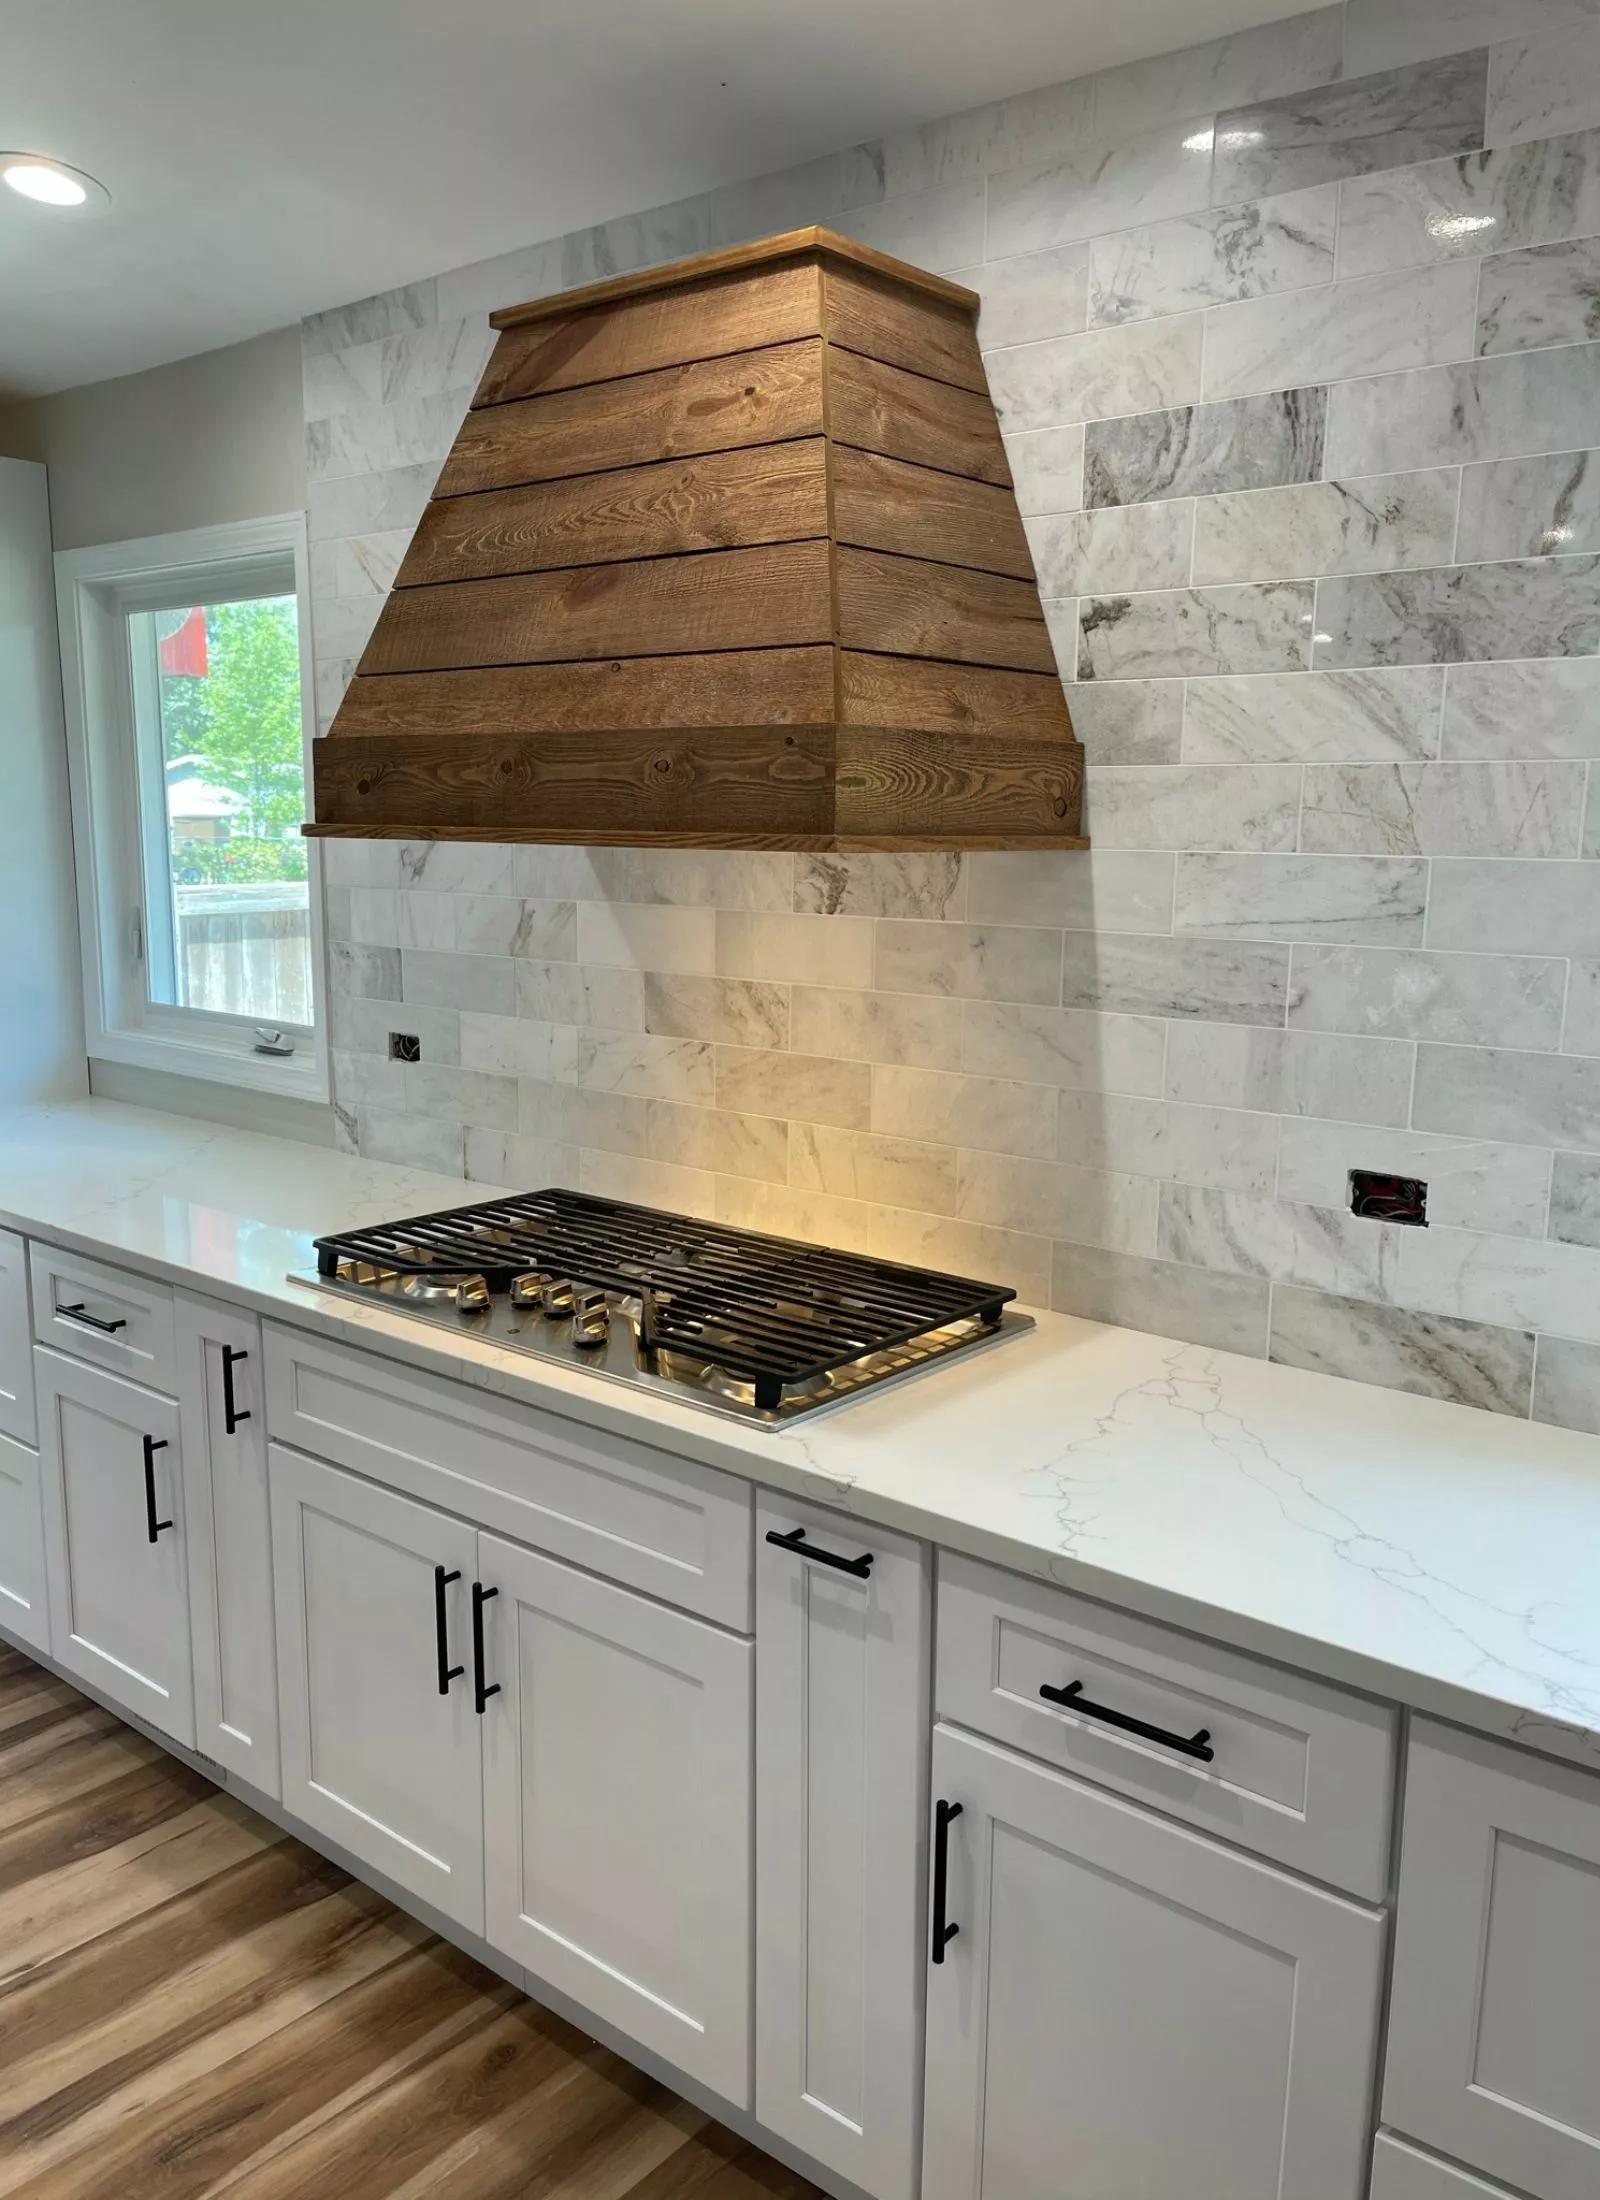 A white kitchen with a wood hood hood that underwent a kitchen remodel.